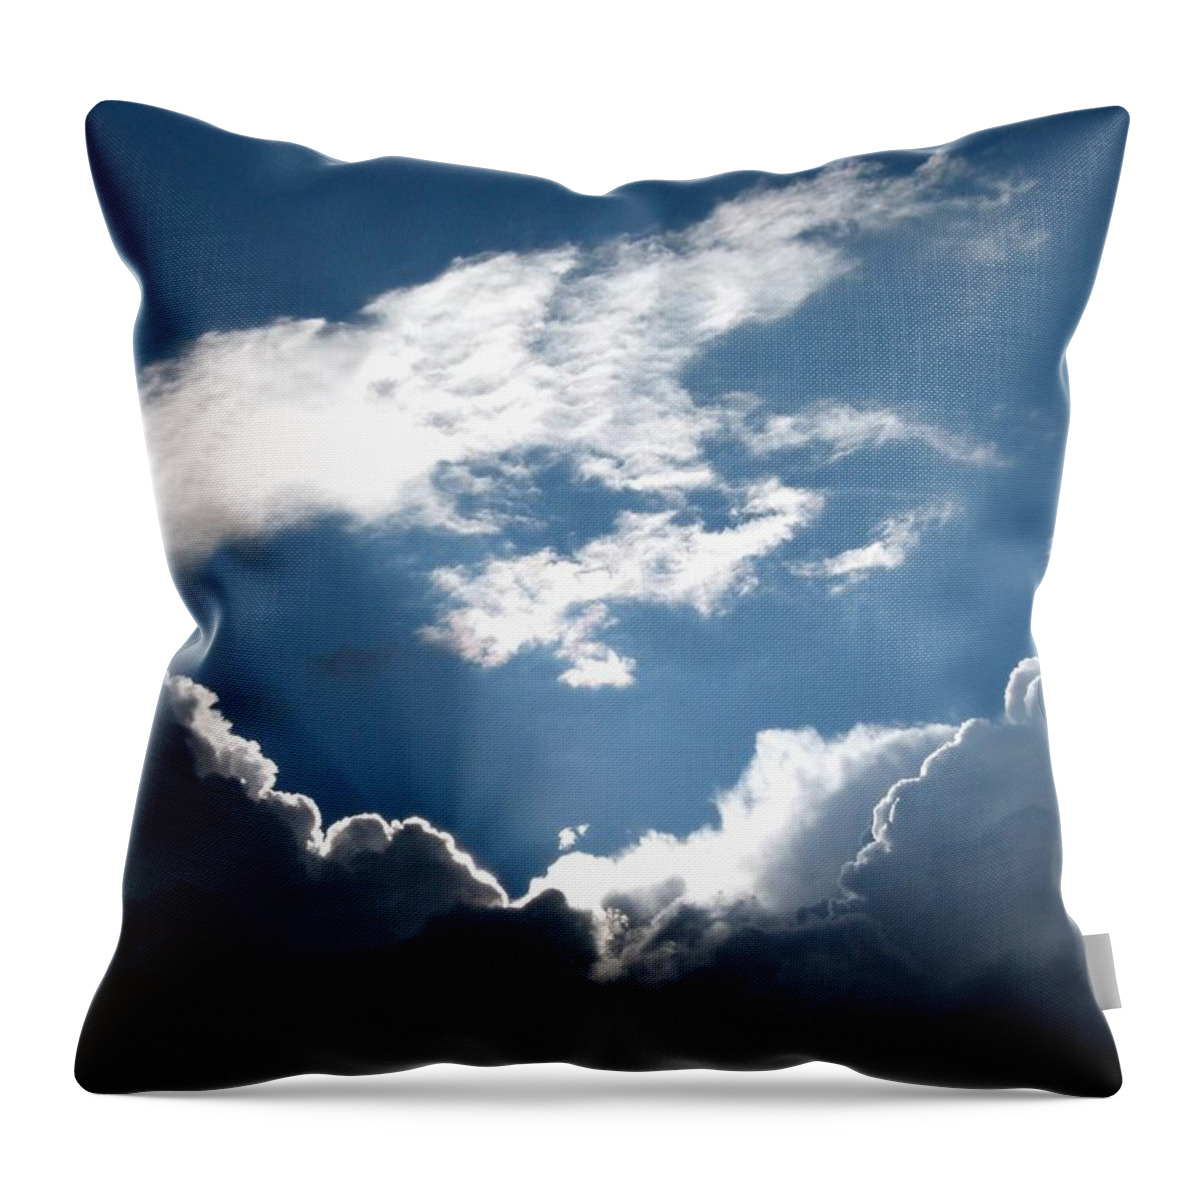 #skydrama Throw Pillow featuring the photograph Sky Drama by Will Borden